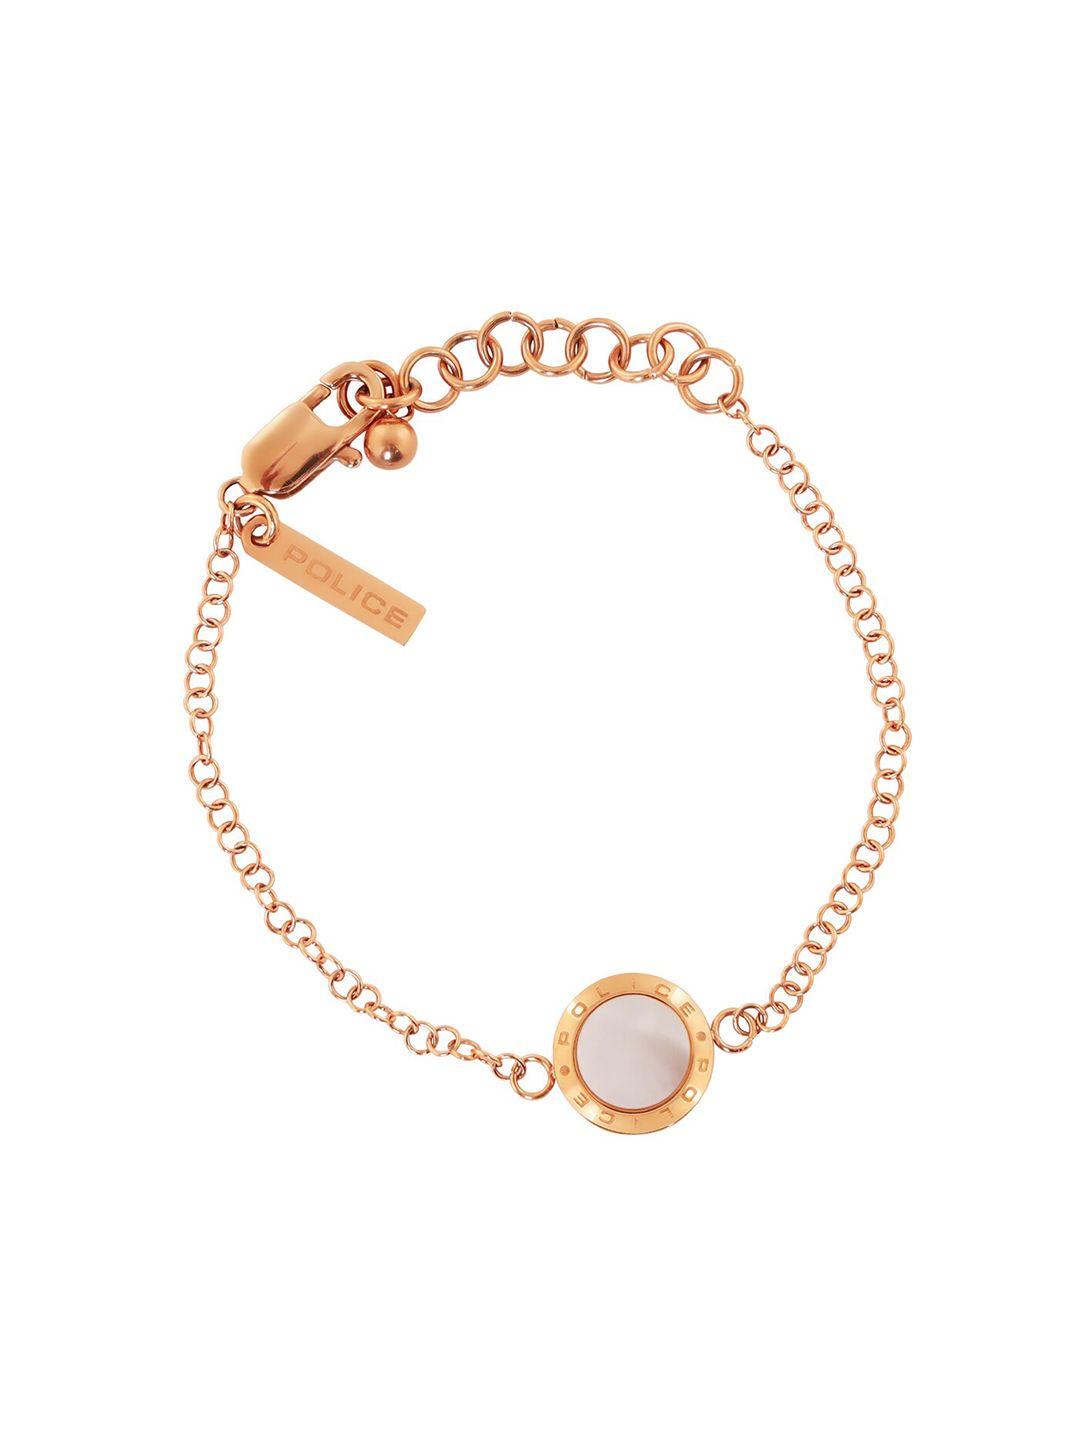 Police Women Gold-Toned Silver Link Bracelet Price in India